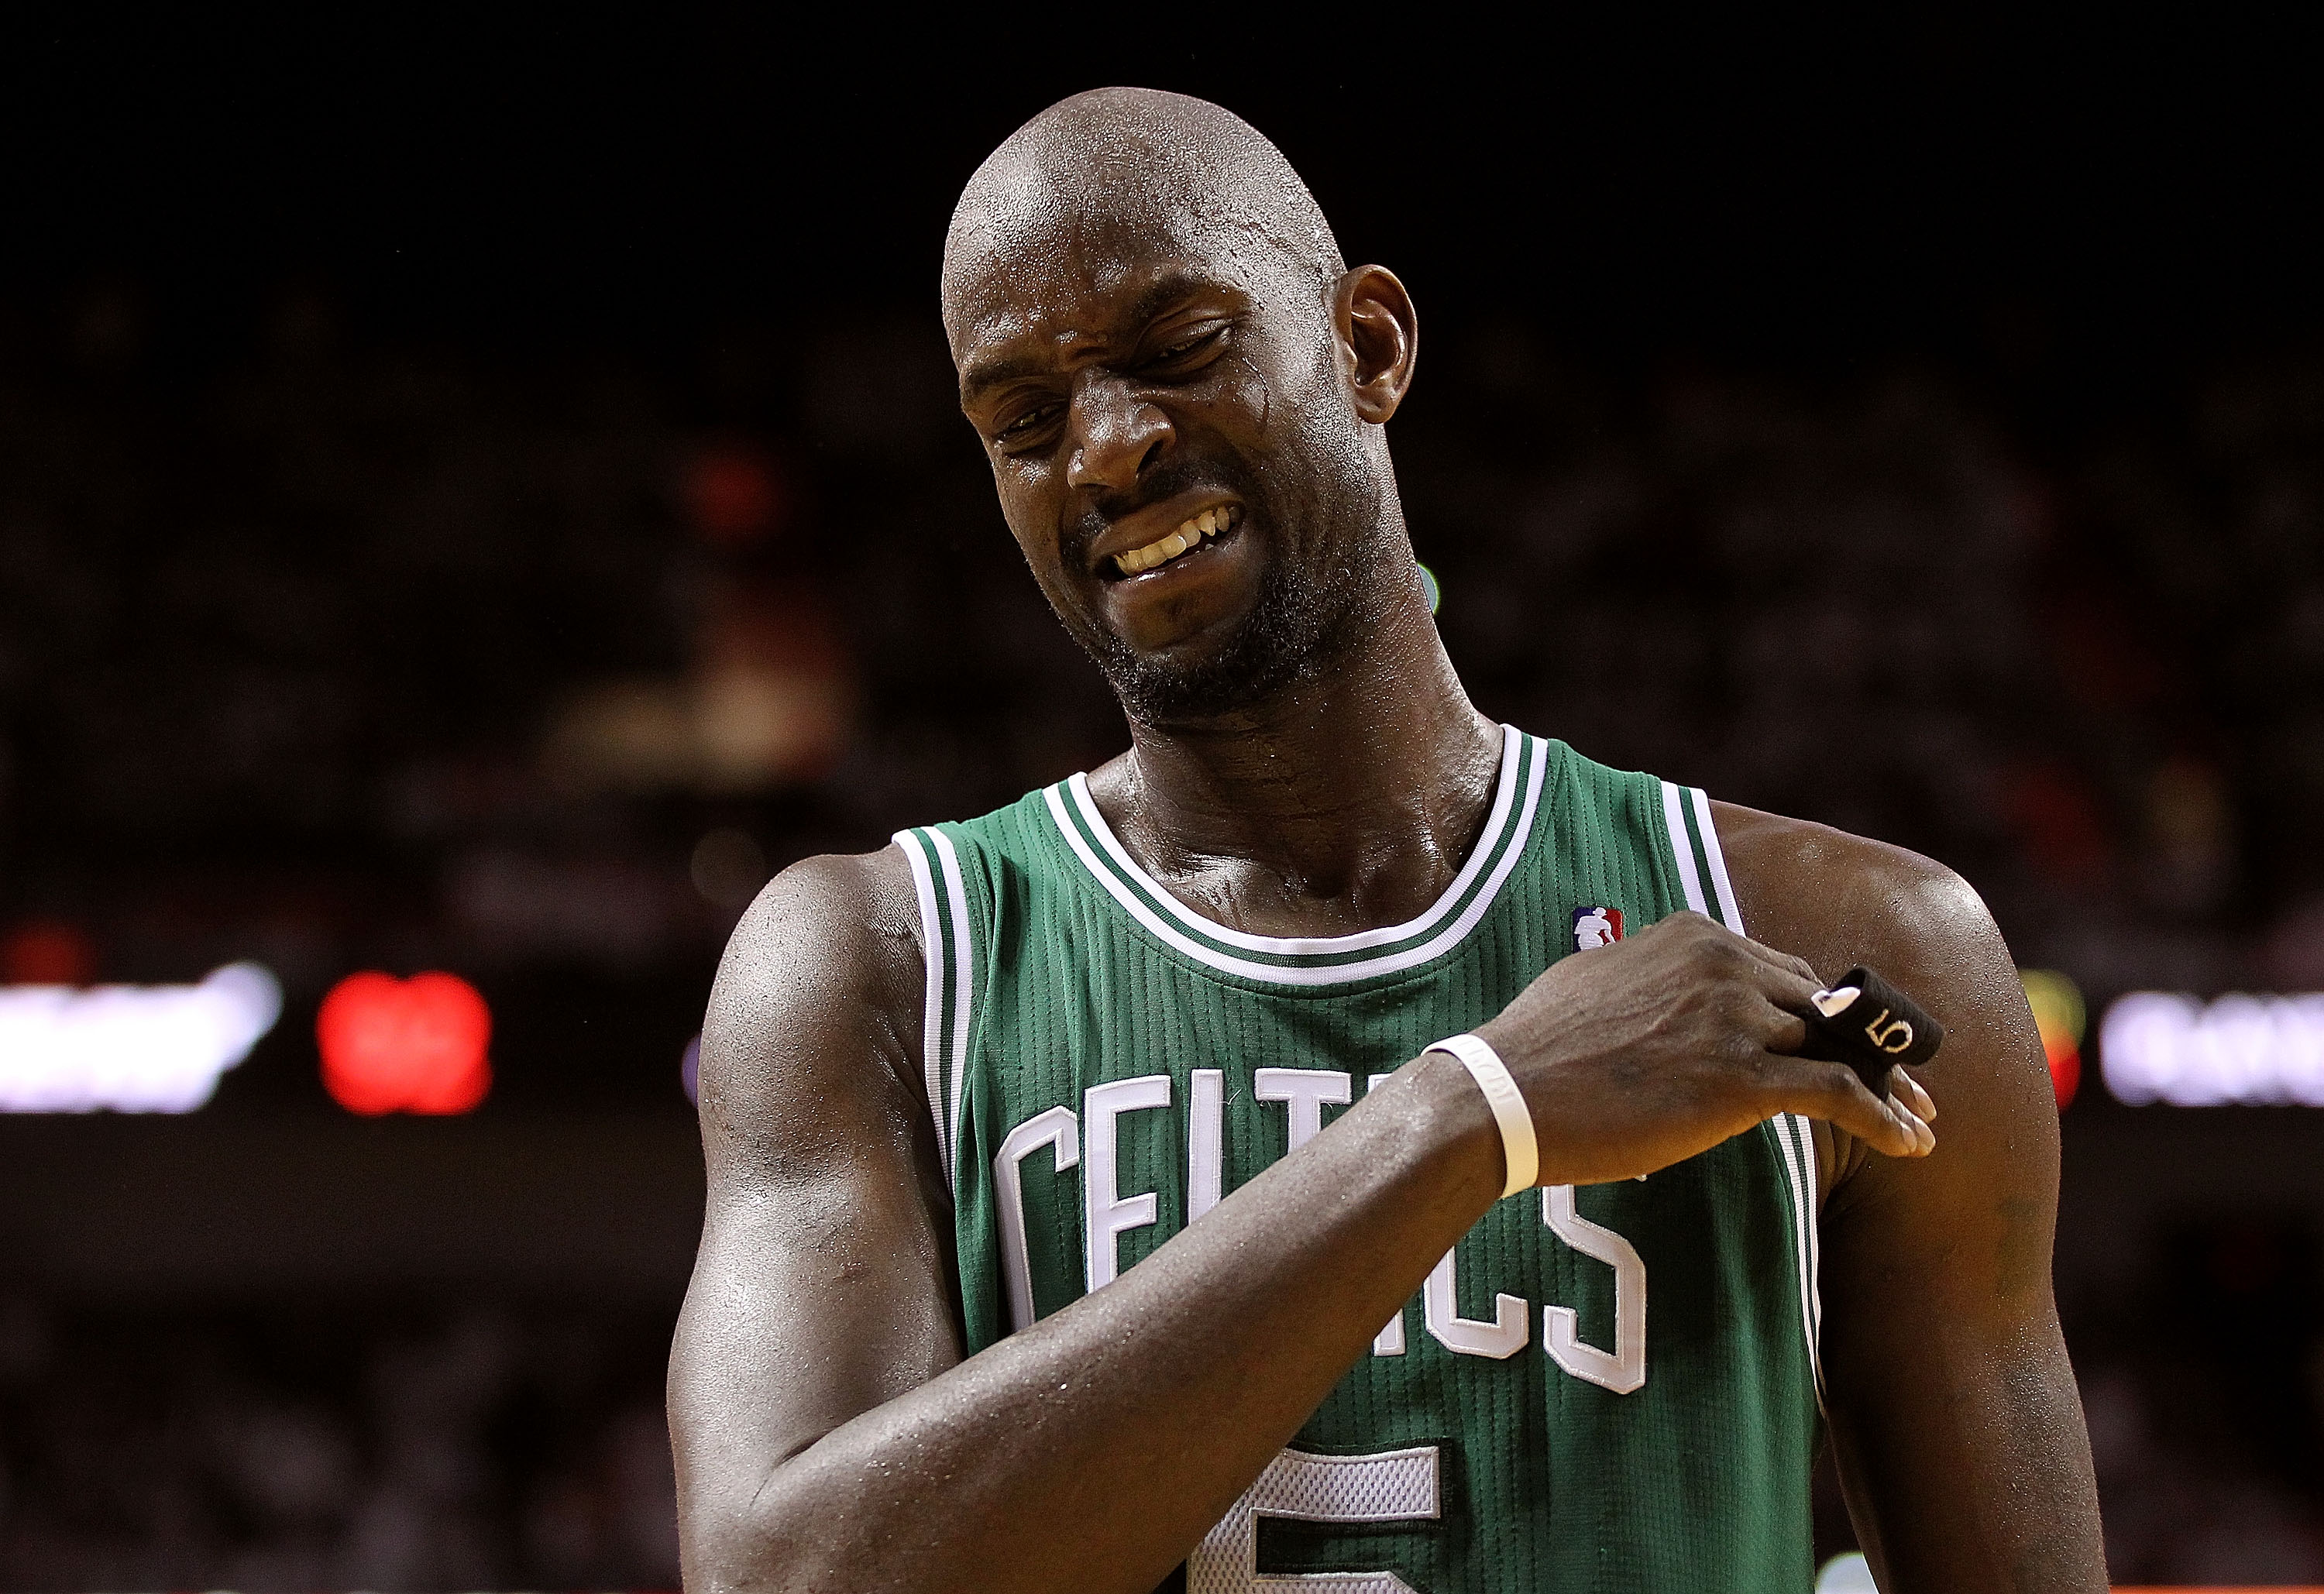 MIAMI, FL - MAY 03:  Kevin Garnett #5 of the Boston Celtics reacts to a foul during Game Two of the Eastern Conference Semifinals of the 2011 NBA Playoffs against the Miami Heat at American Airlines Arena on May 3, 2011 in Miami, Florida. NOTE TO USER: Us